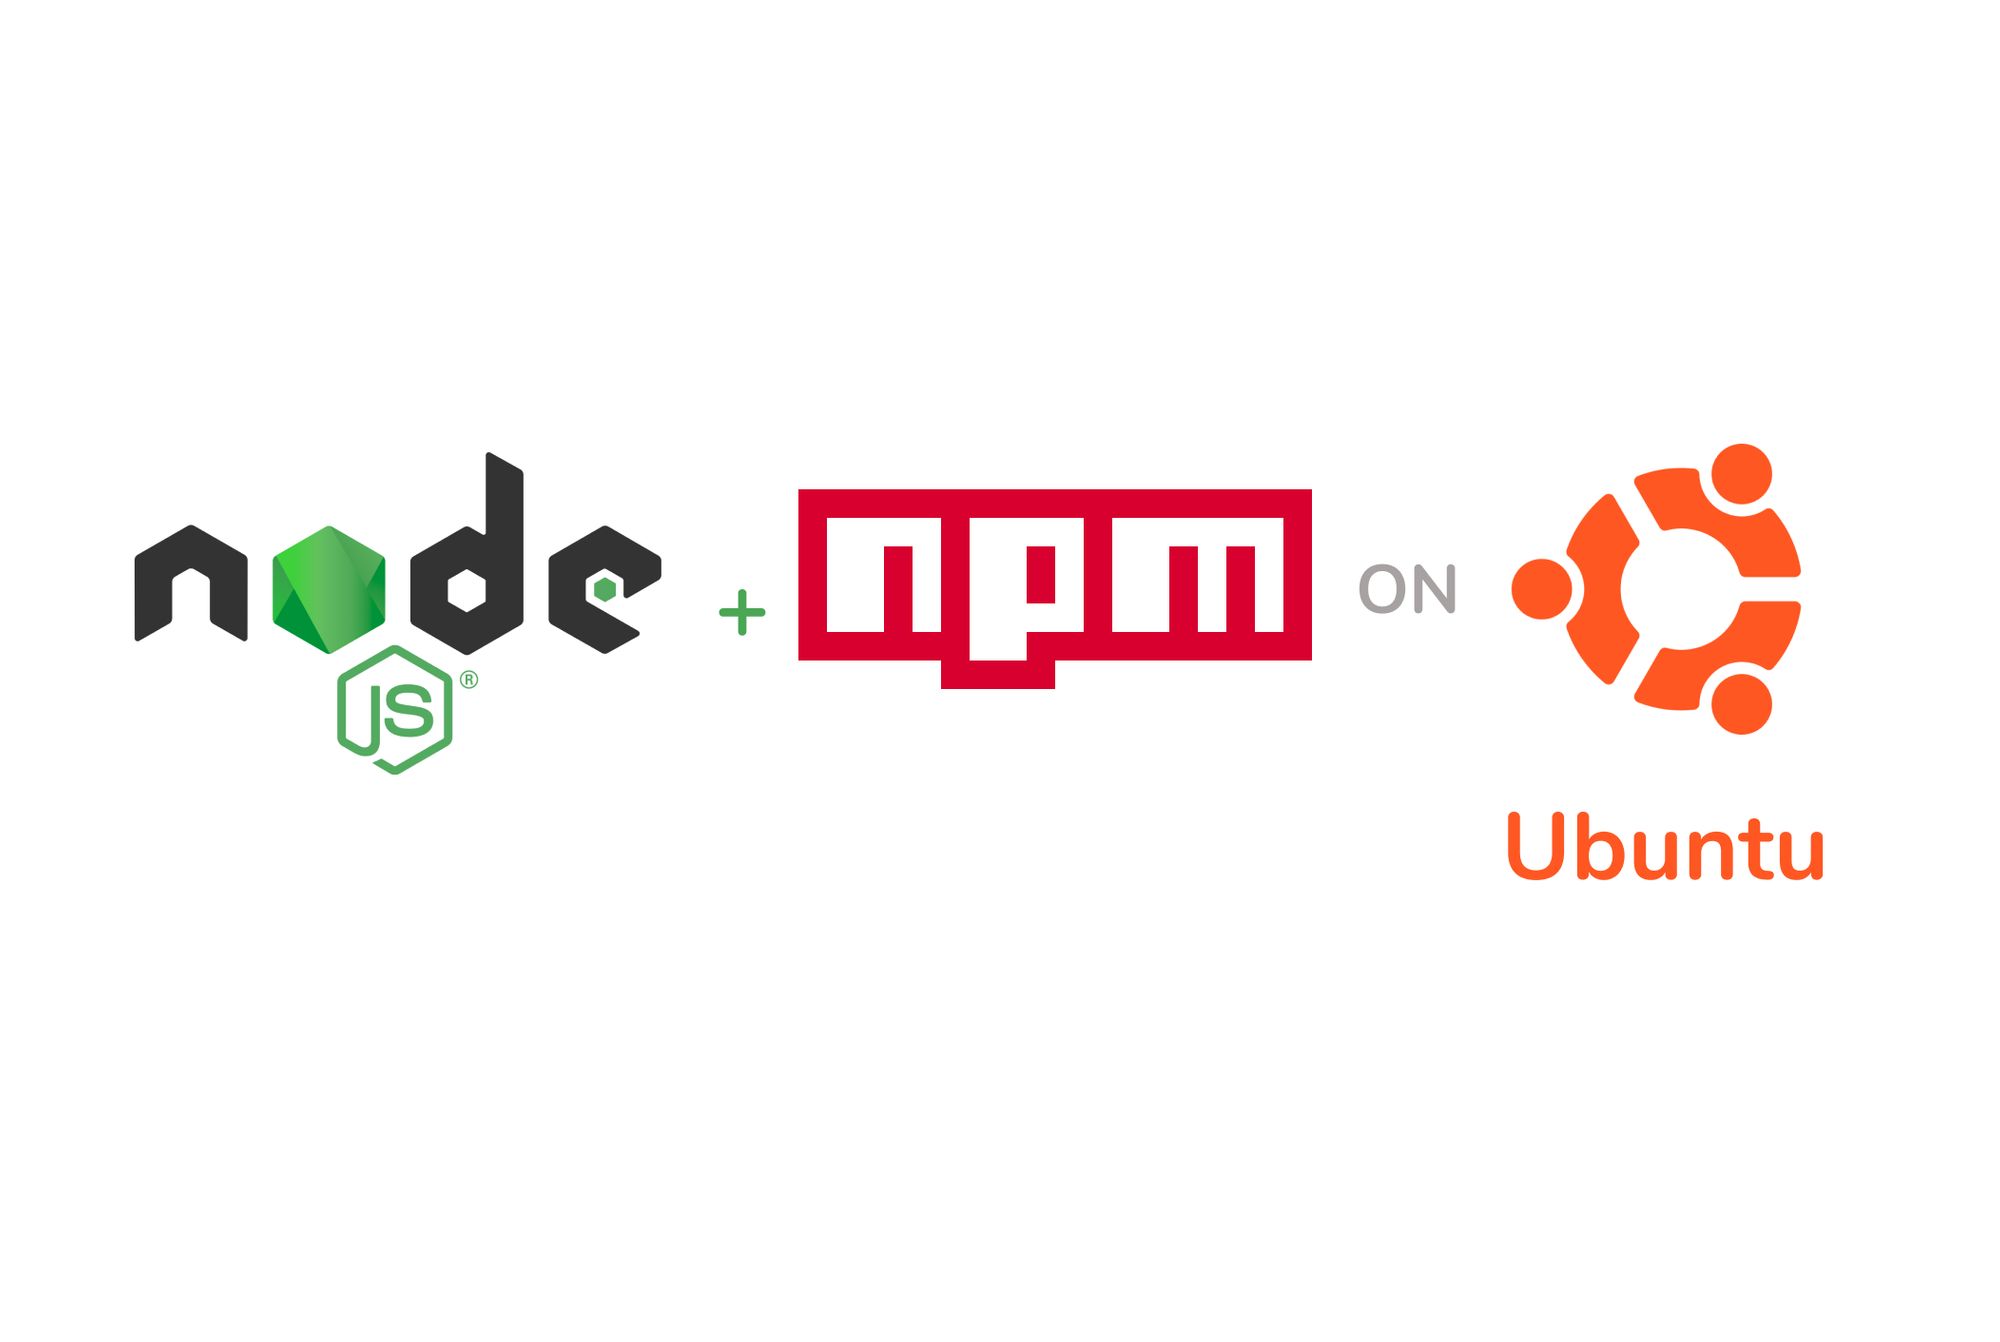 How to Install Node.js on Ubuntu and Update npm to the Latest Version